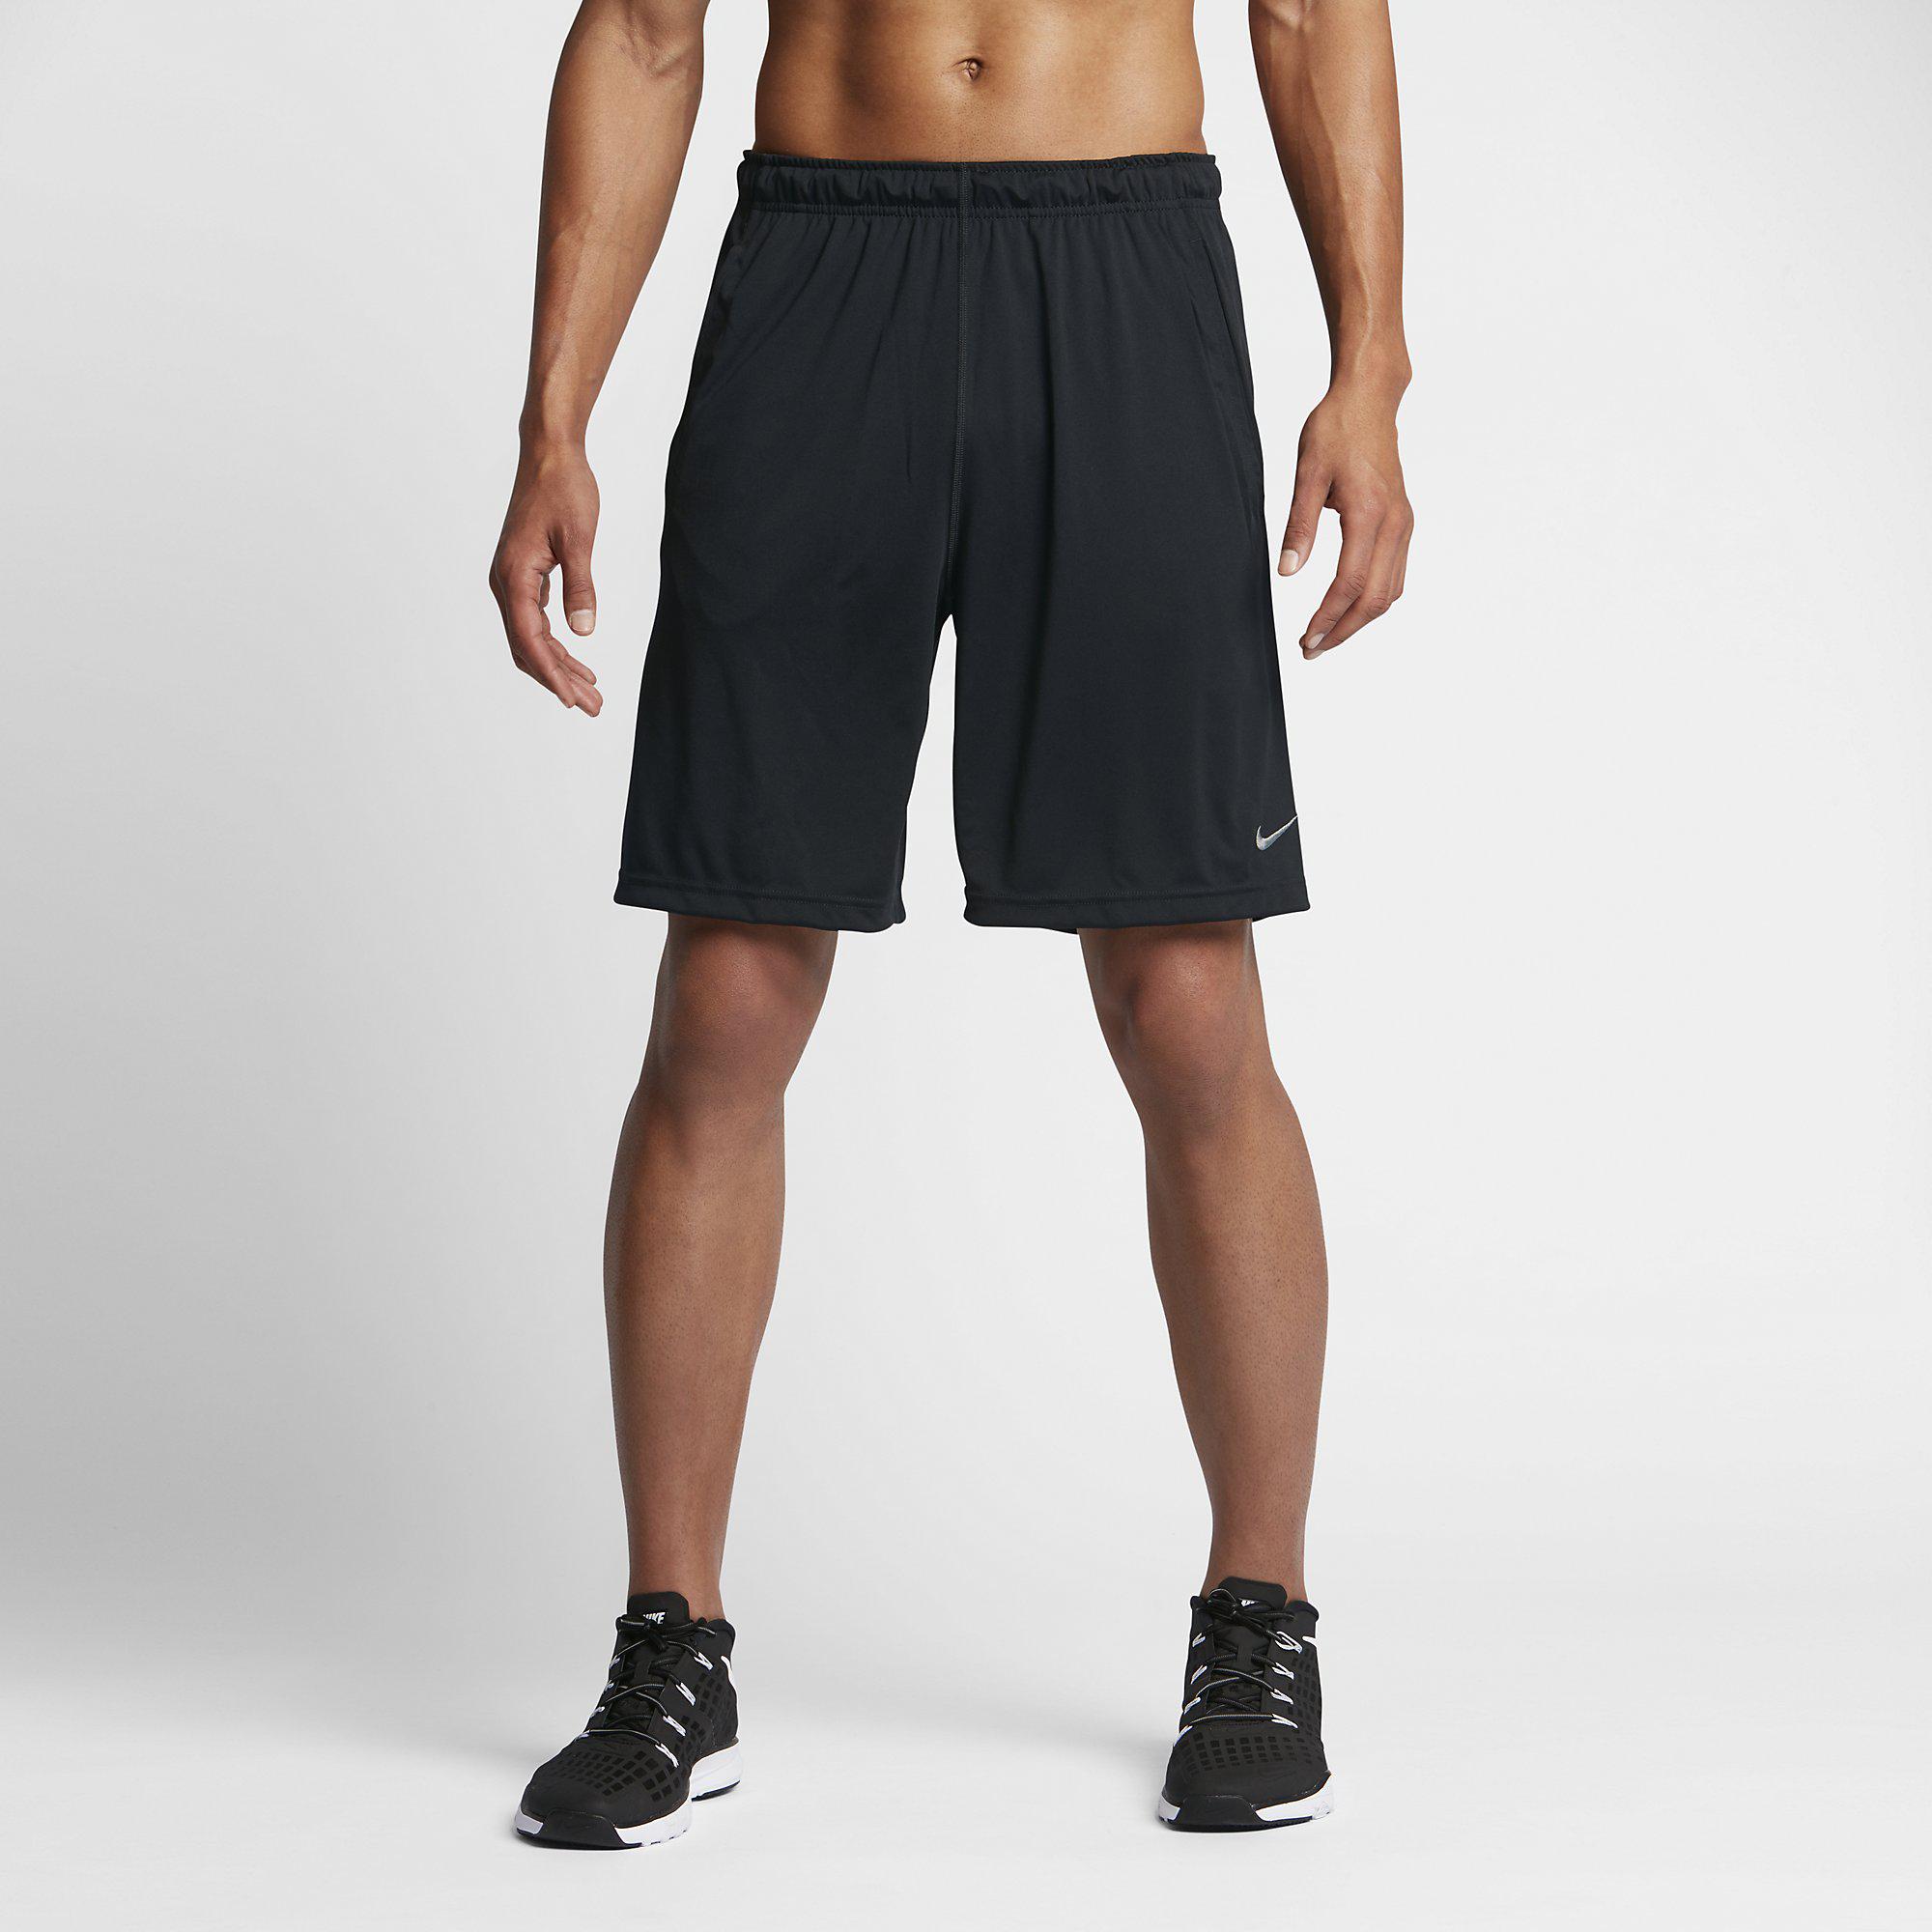 6 Day Workout Black Shorts for Build Muscle